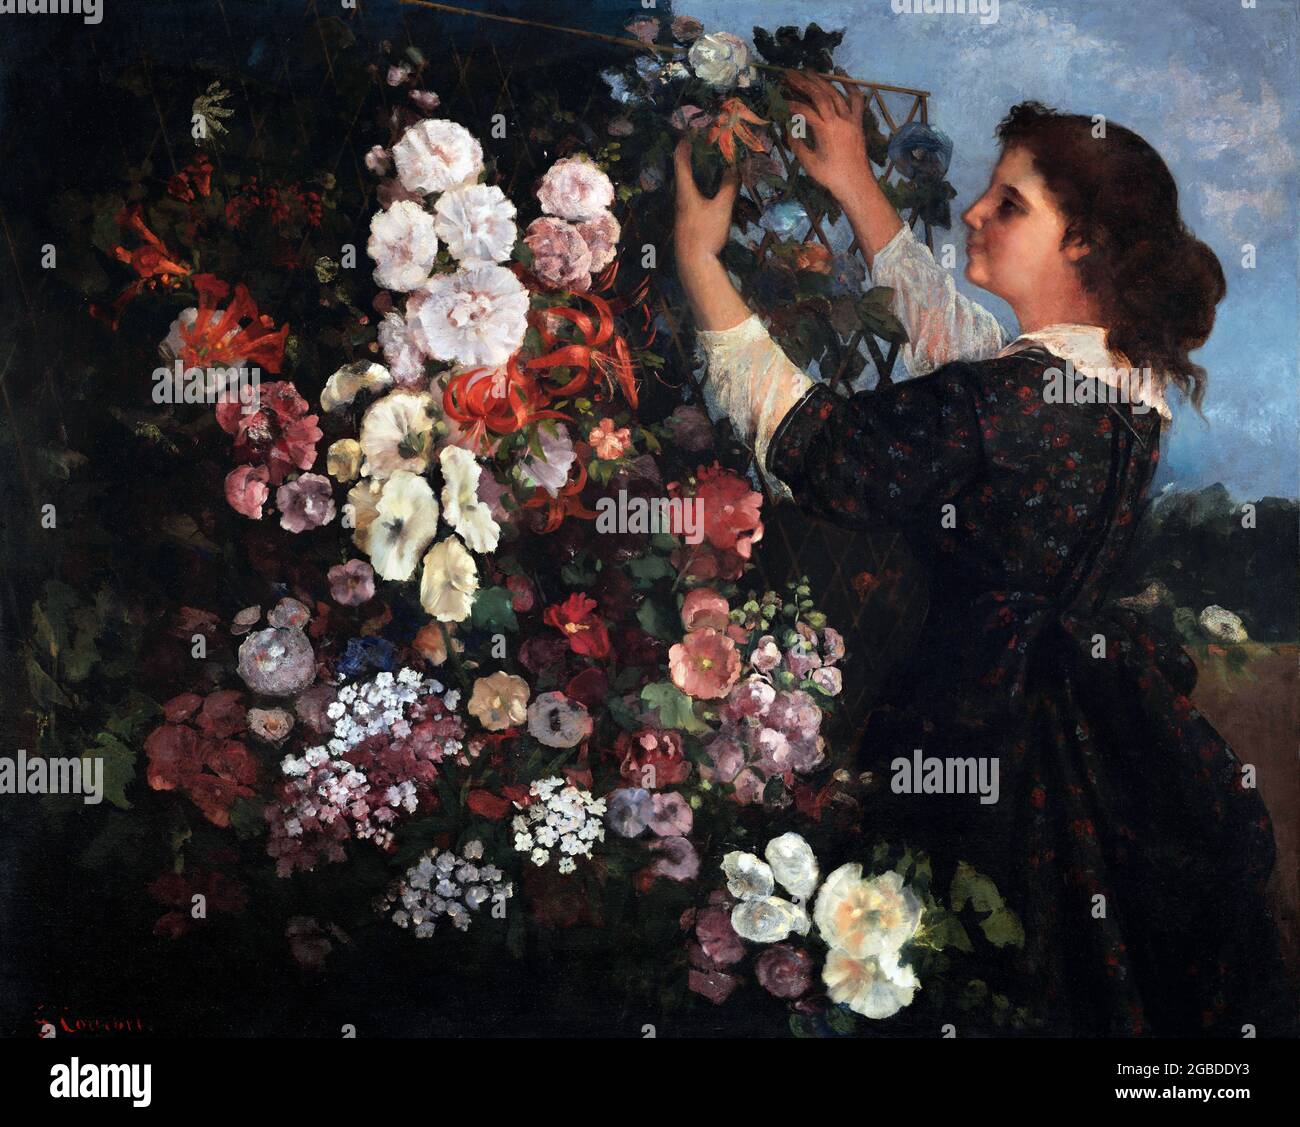 The Trellis by Gustave Courbet (1819-1877), oil on canvas, 1862 Stock Photo